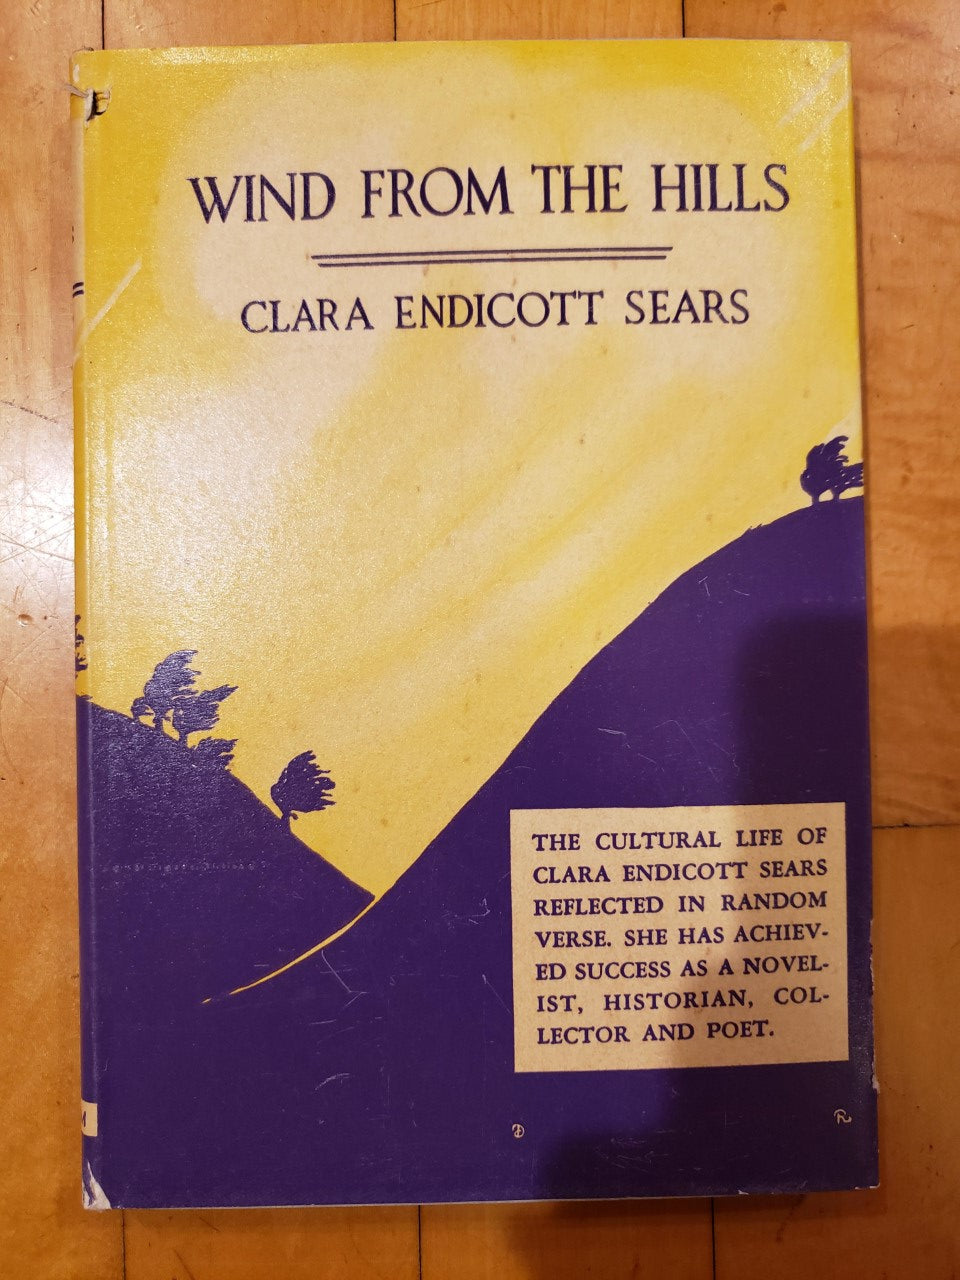 Wind from the hills and other poems by Clara Endicott Sears